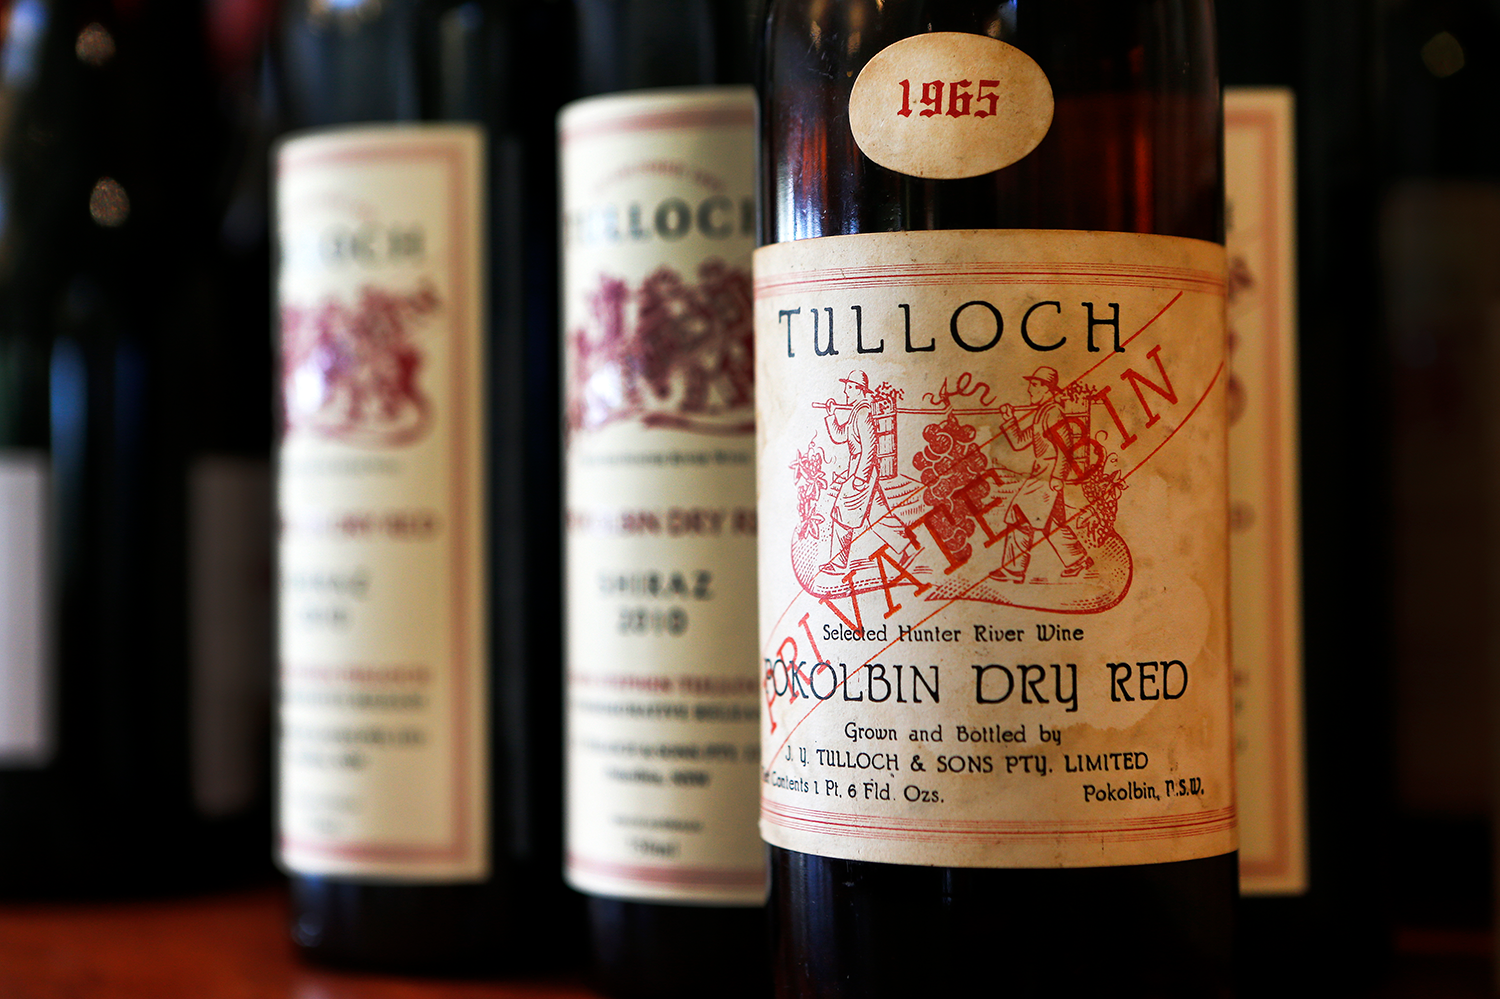 Tulloch Wines – Vertical Tasting of Pokolbin Dry Red Shiraz over 6 Vintages with Charcuterie board